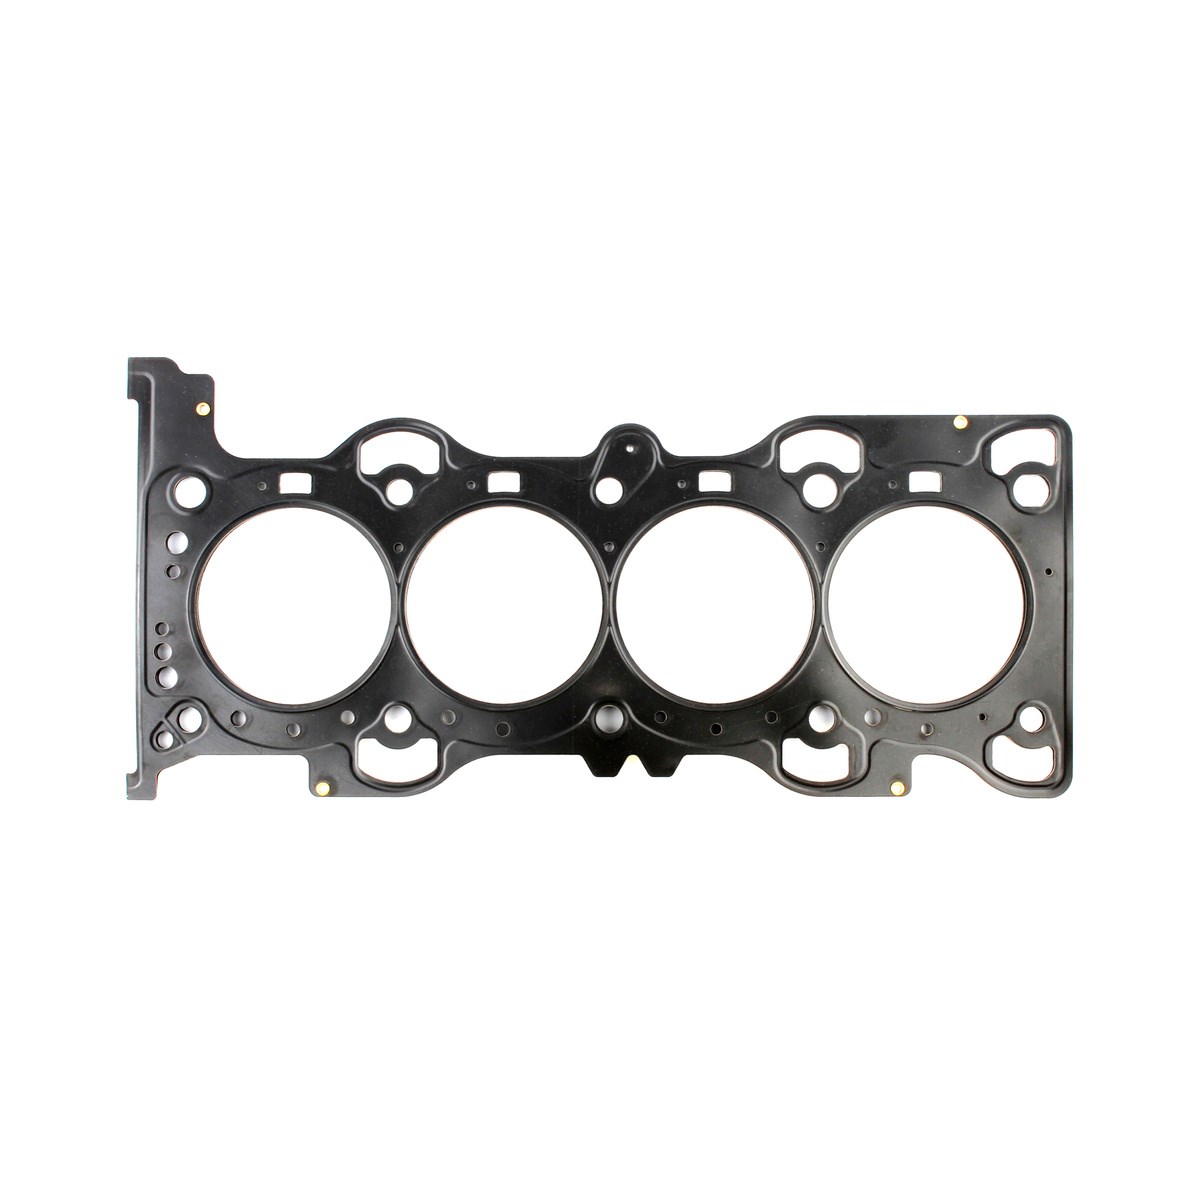 Cylinder Head Gasket Ford 2012-2015 2.0L EcoBoost .040" MLS , 89mm Bore Cometic C15317-040